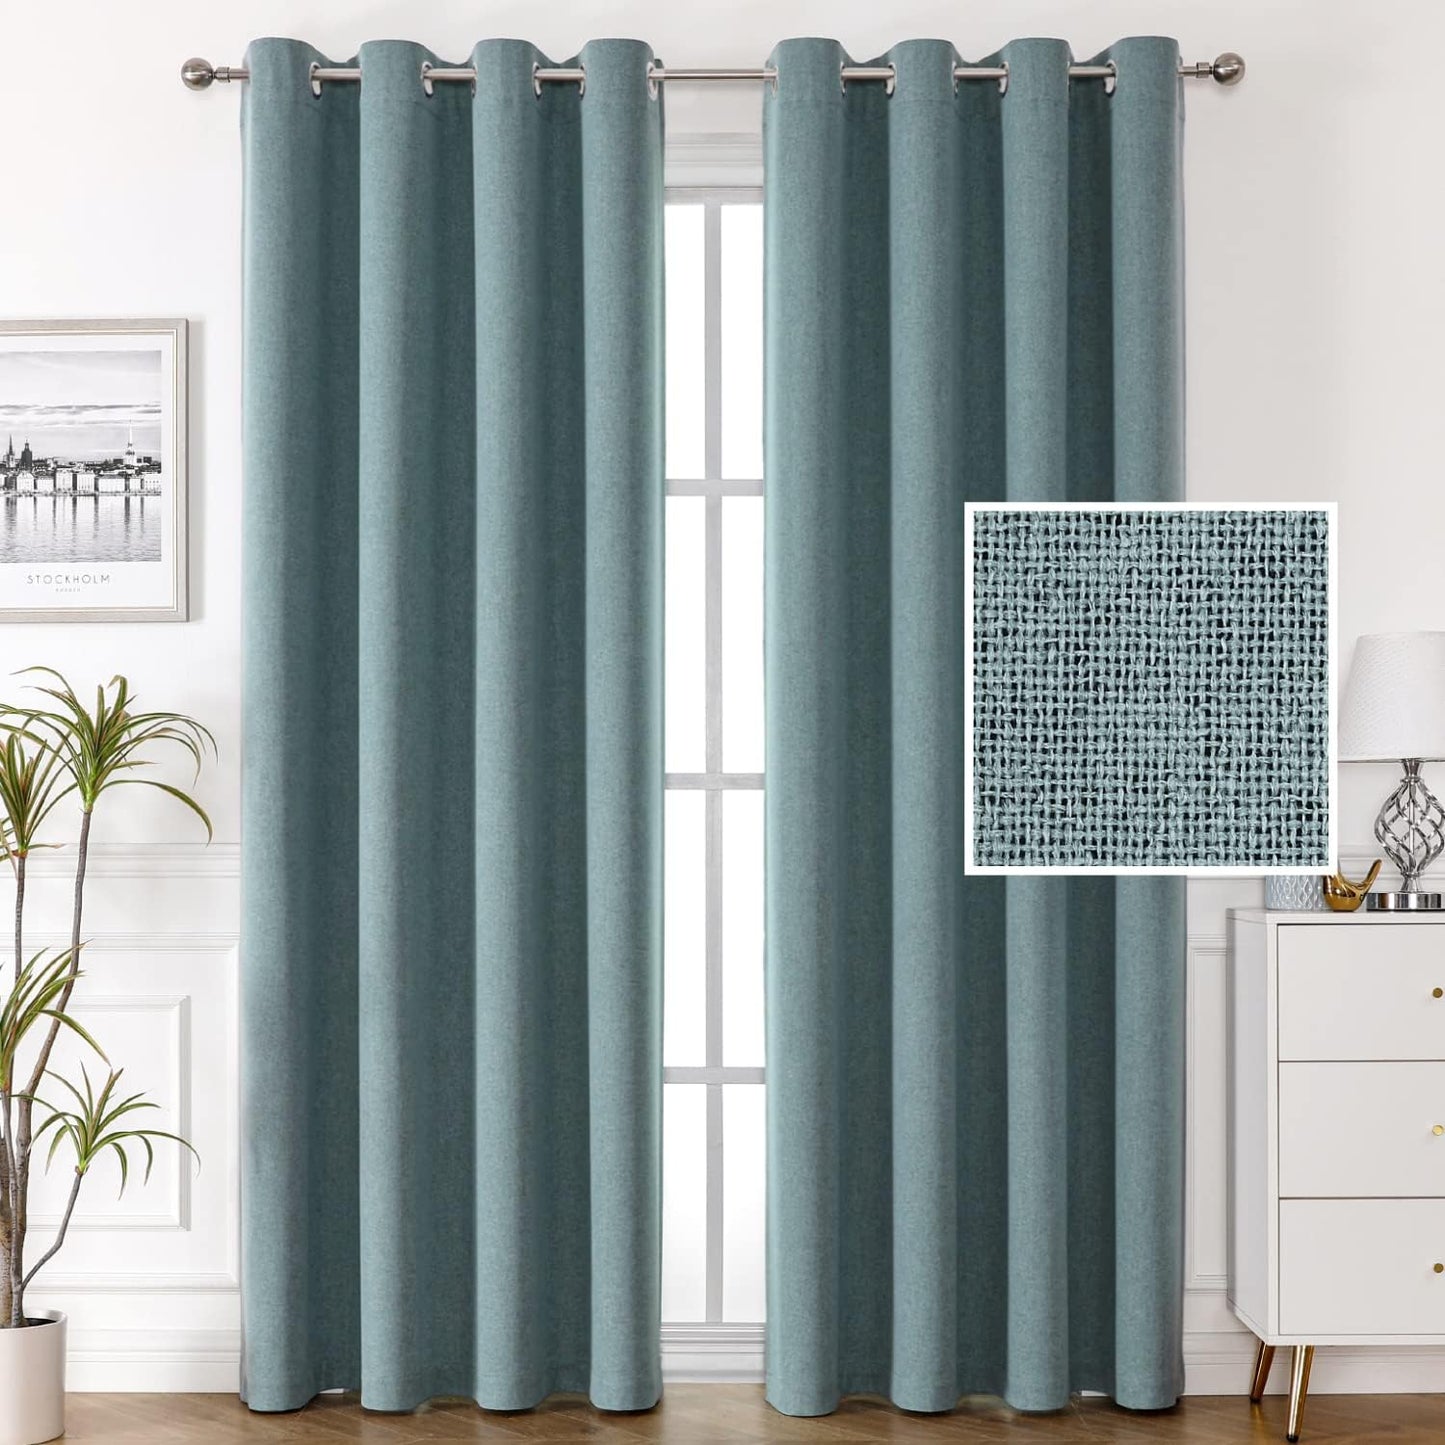 H.VERSAILTEX 100% Blackout Linen Look Curtains Thermal Insulated Curtains for Living Room Textured Burlap Drapes for Bedroom Grommet Linen Noise Blocking Curtains 42 X 84 Inch, 2 Panels - Sage  H.VERSAILTEX Stone Blue 52"W X 96"L 